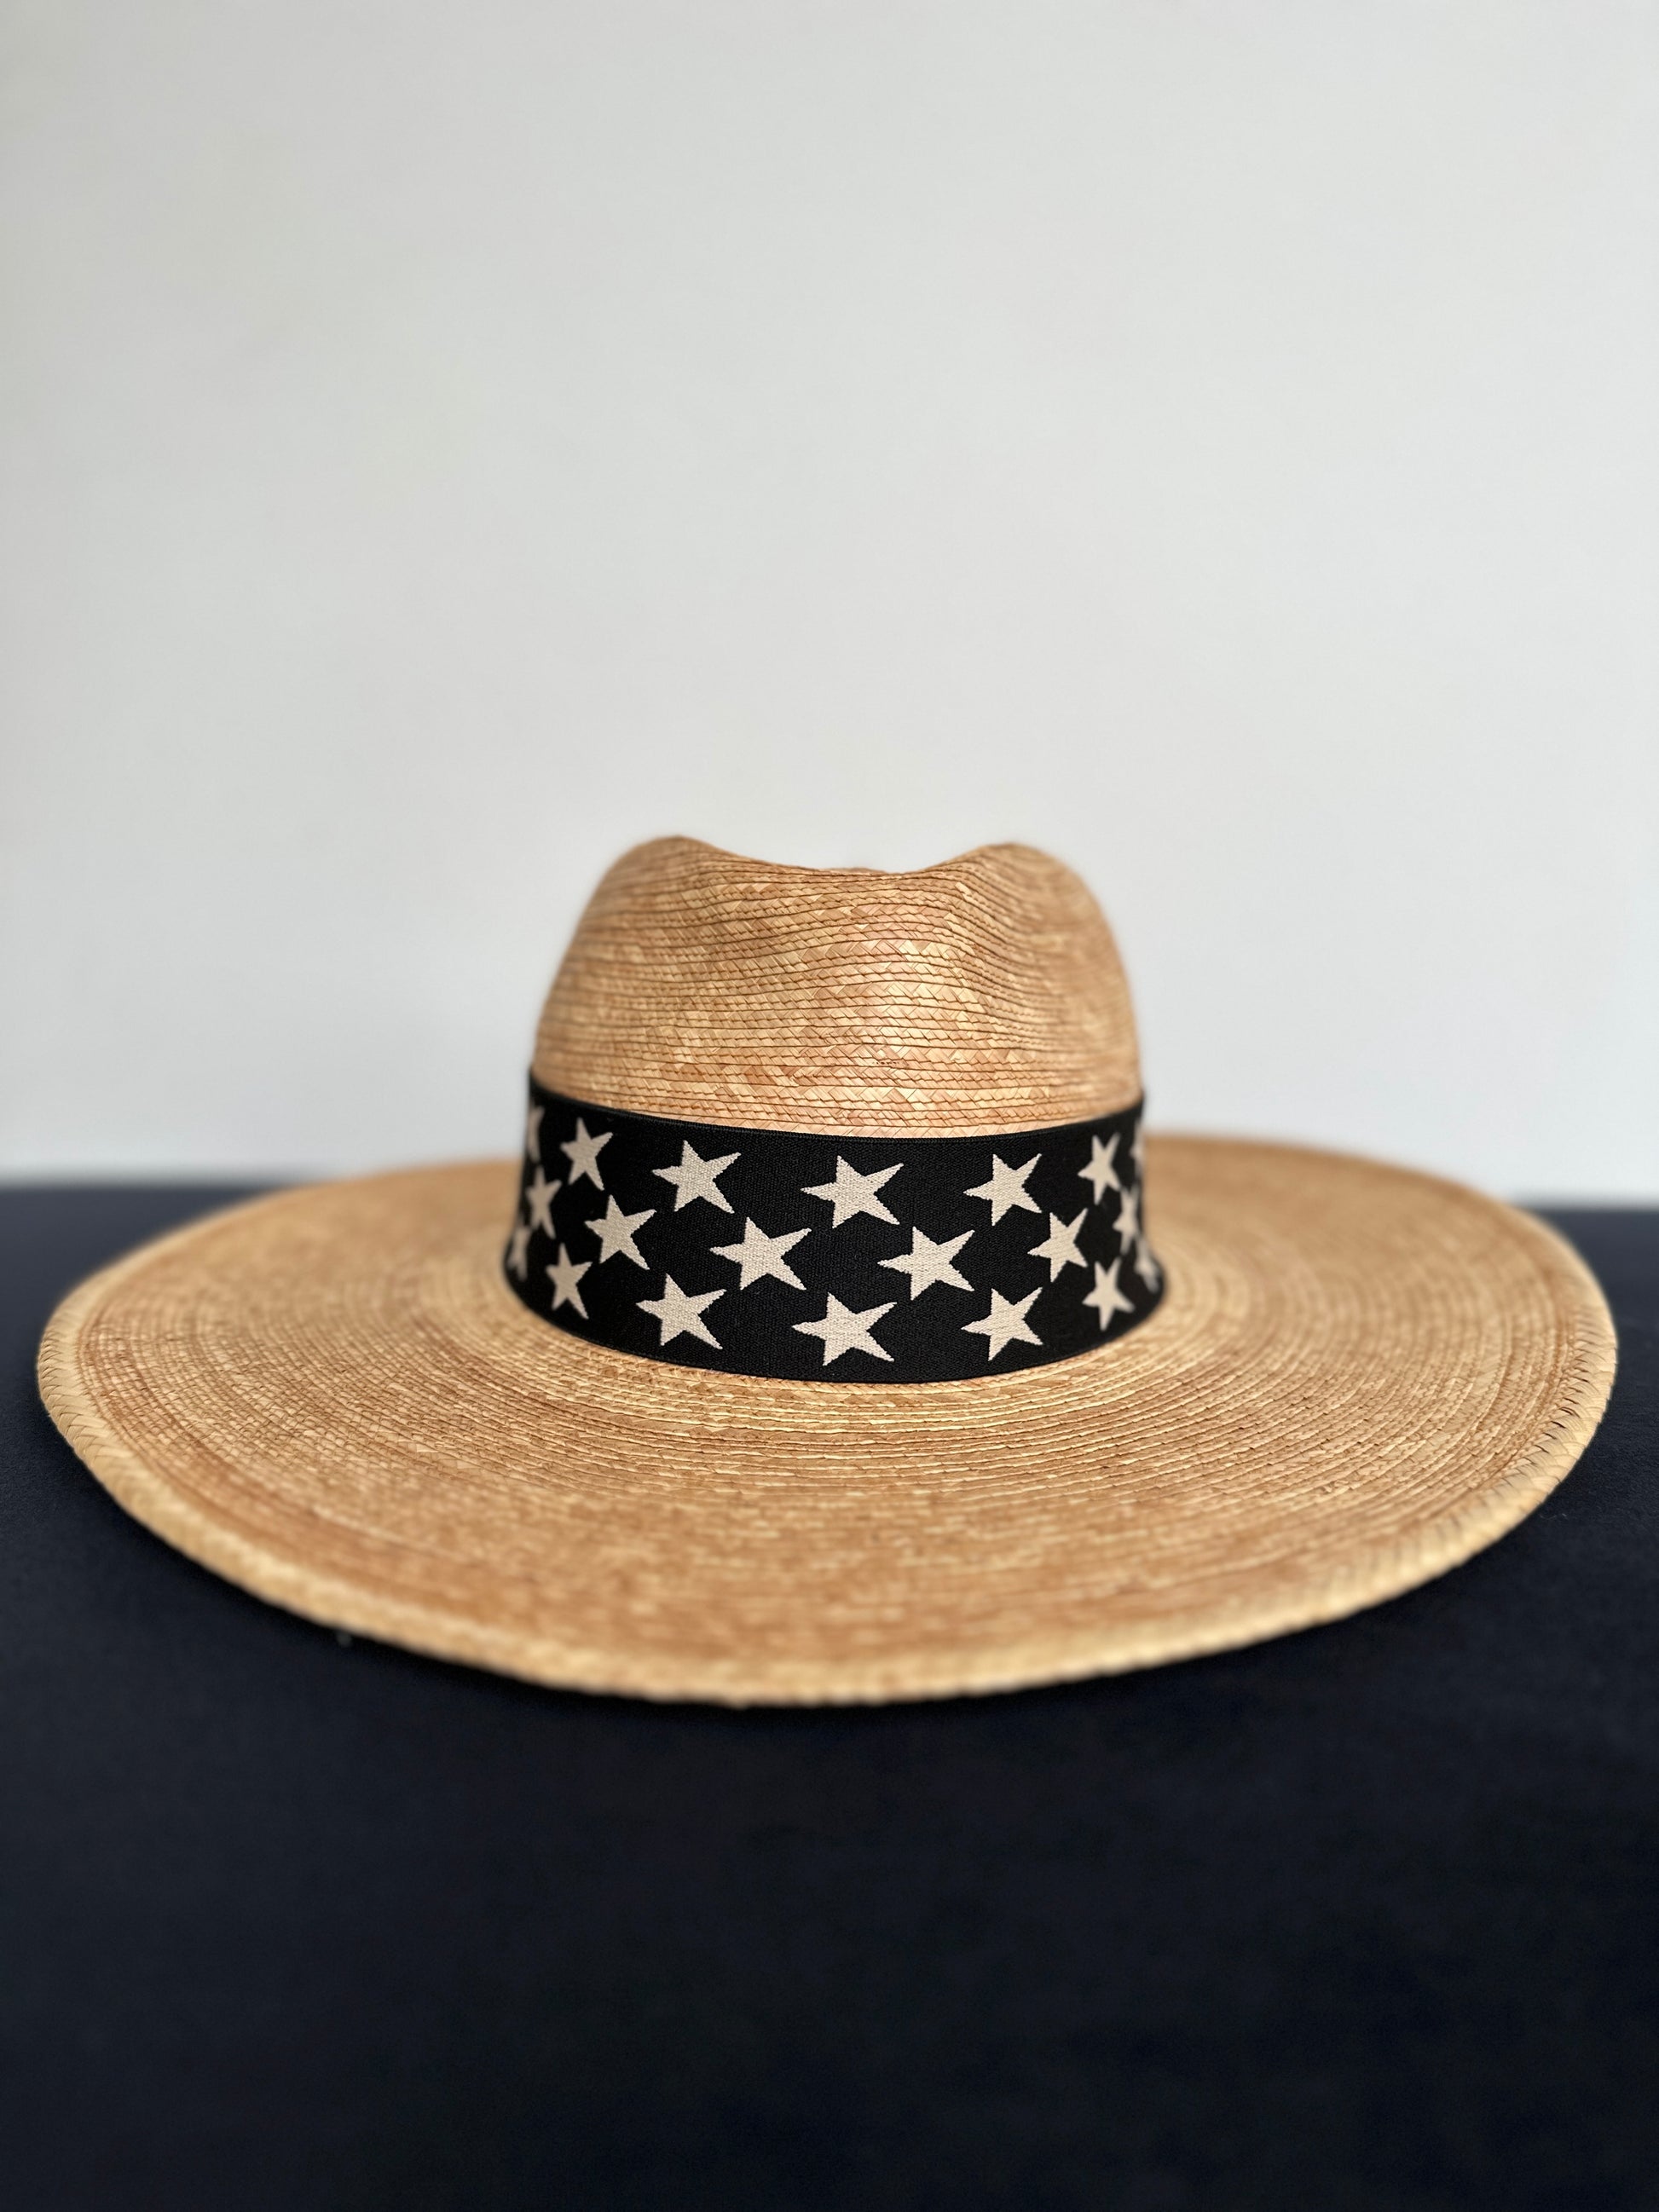 The Double Knot Hat Bands - Black